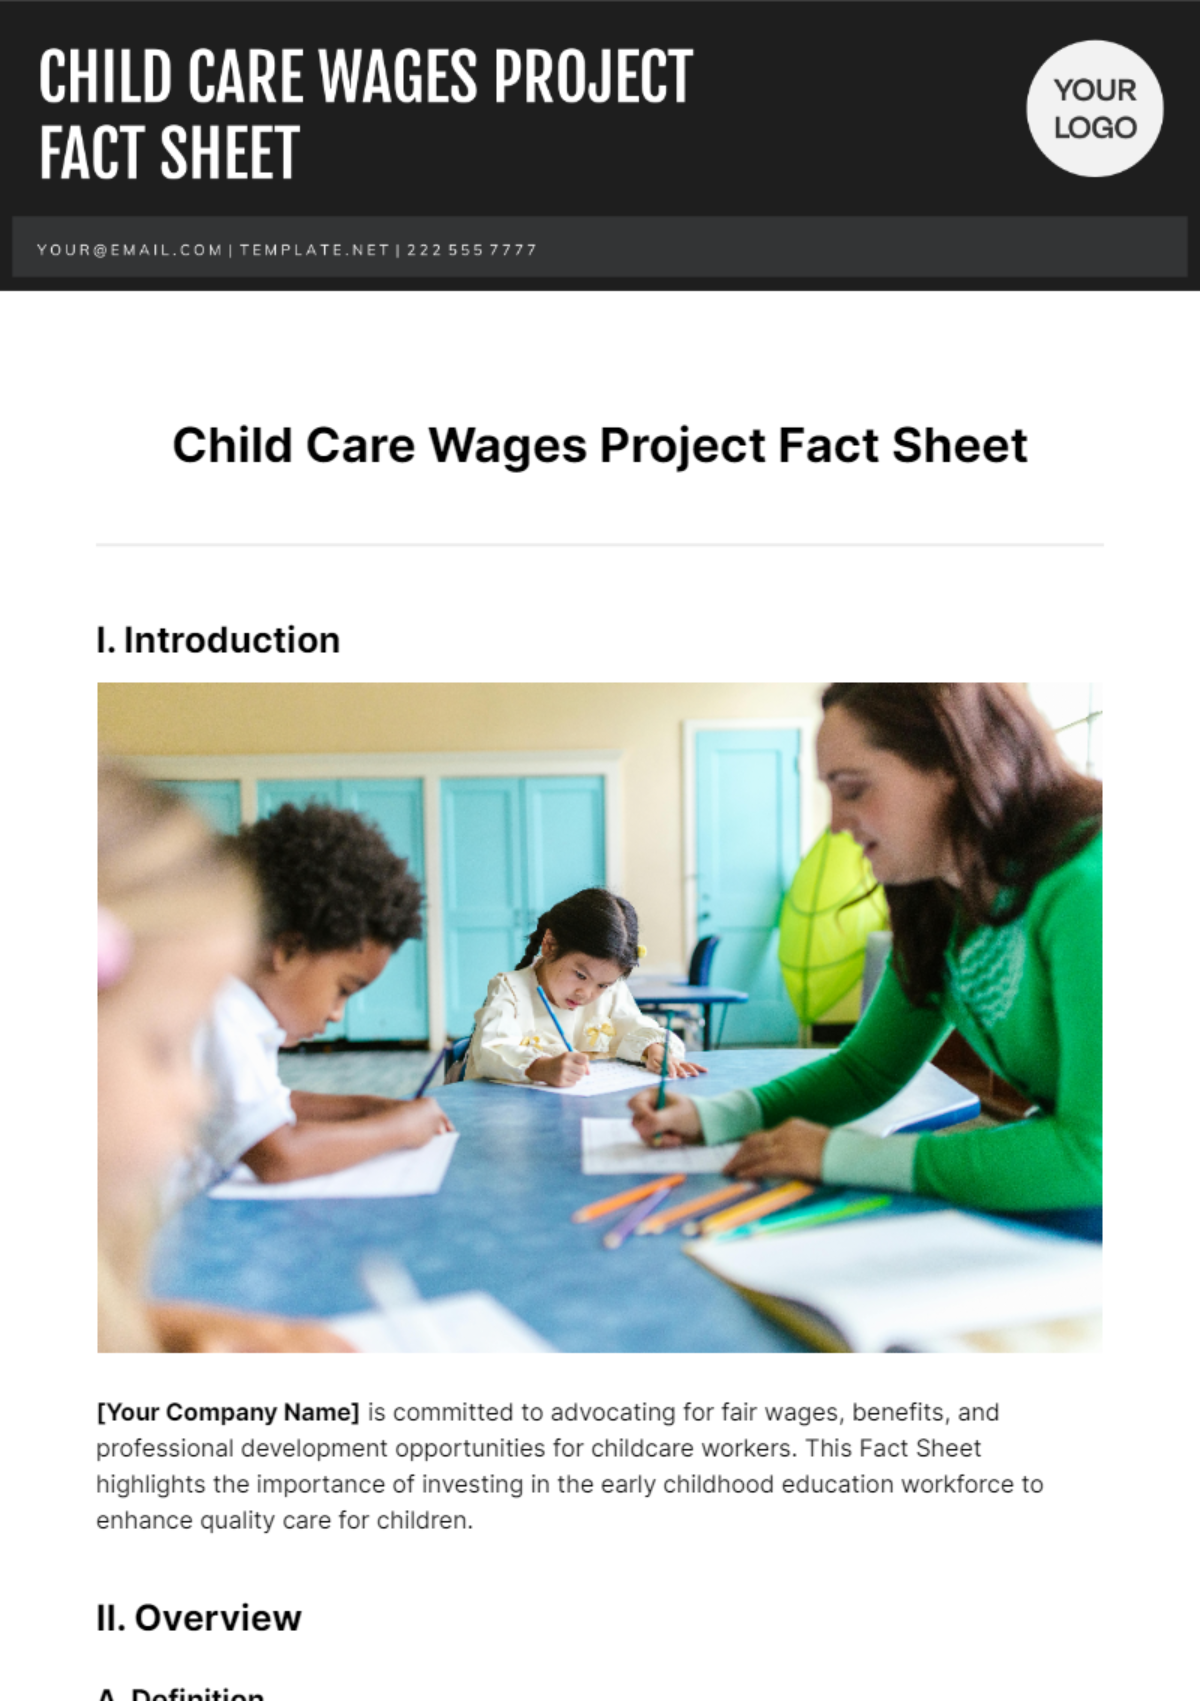 Child Care Wages Project Fact Sheet Template